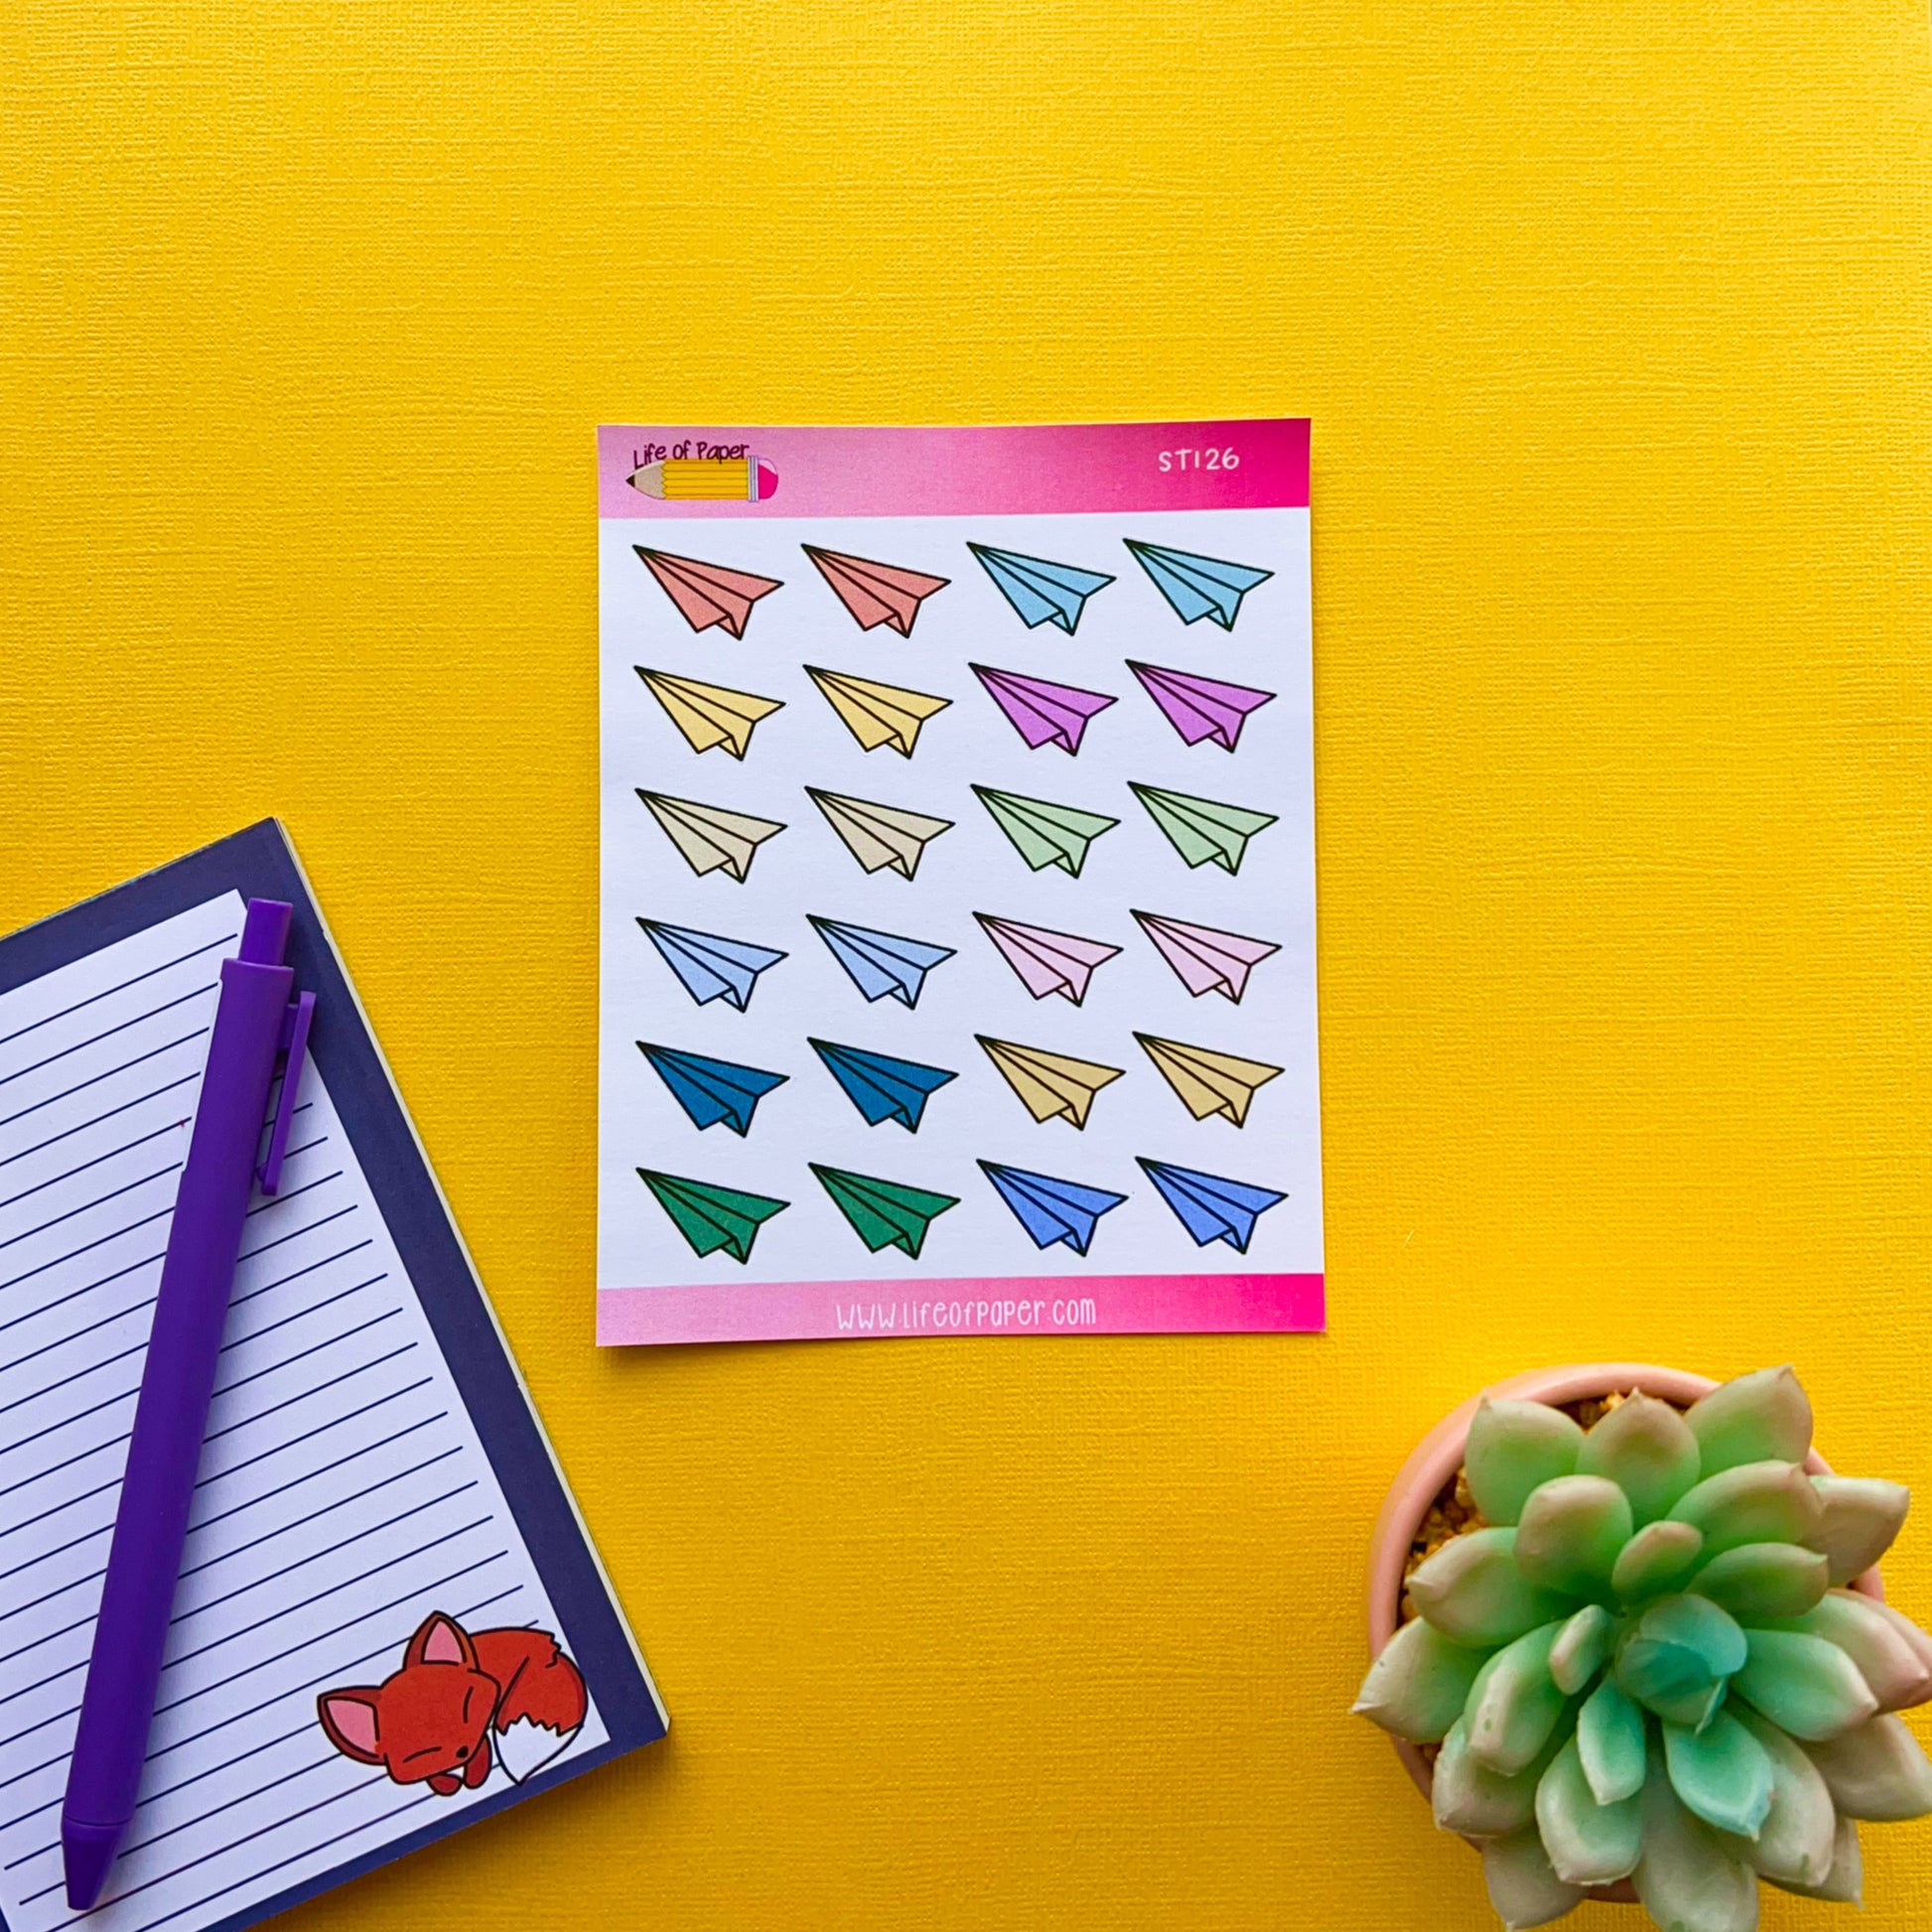 A colorful Paper Aeroplane Sticker Sheet lies on a bright yellow surface. To the left, there is a notebook with a purple pen resting on it, featuring a small fox sticker in the corner. On the right, a green succulent plant is placed in a small pot, adding to the nostalgic fun.